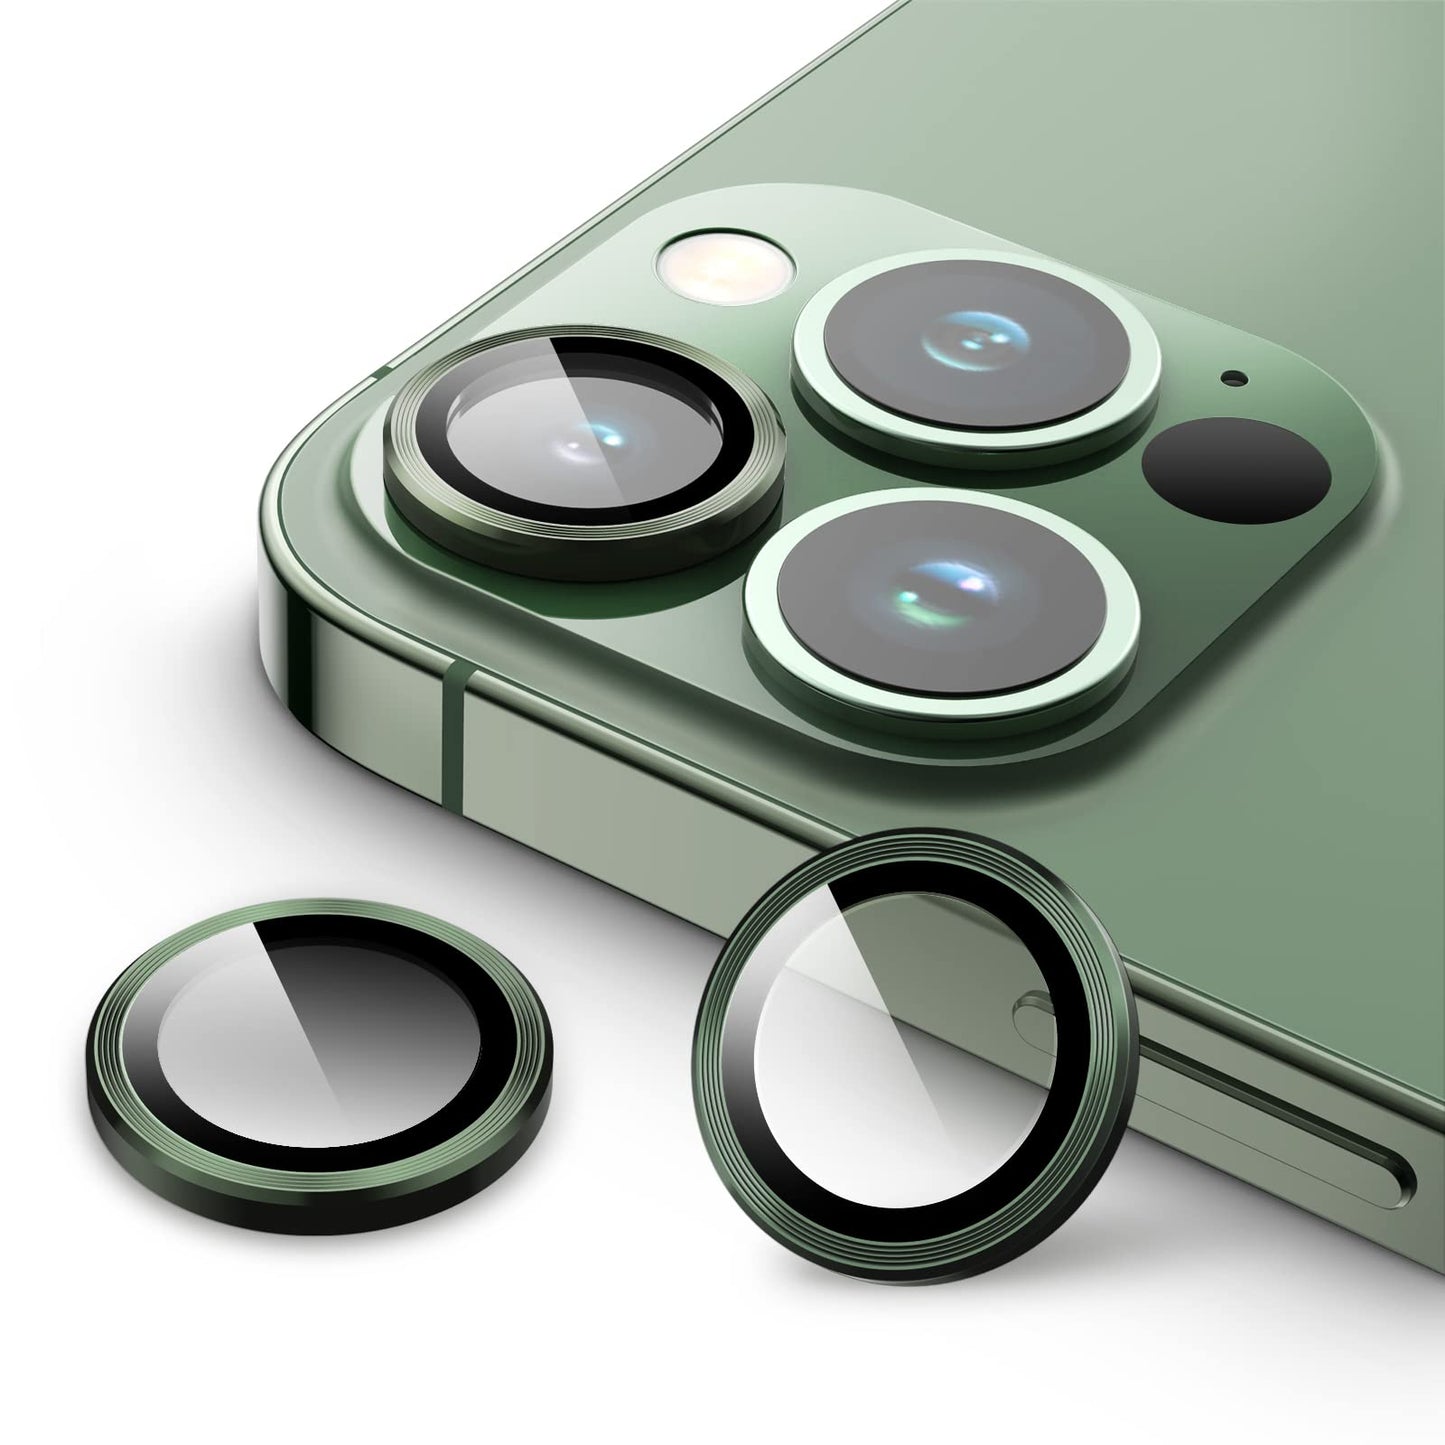 iPhone Lens Protection